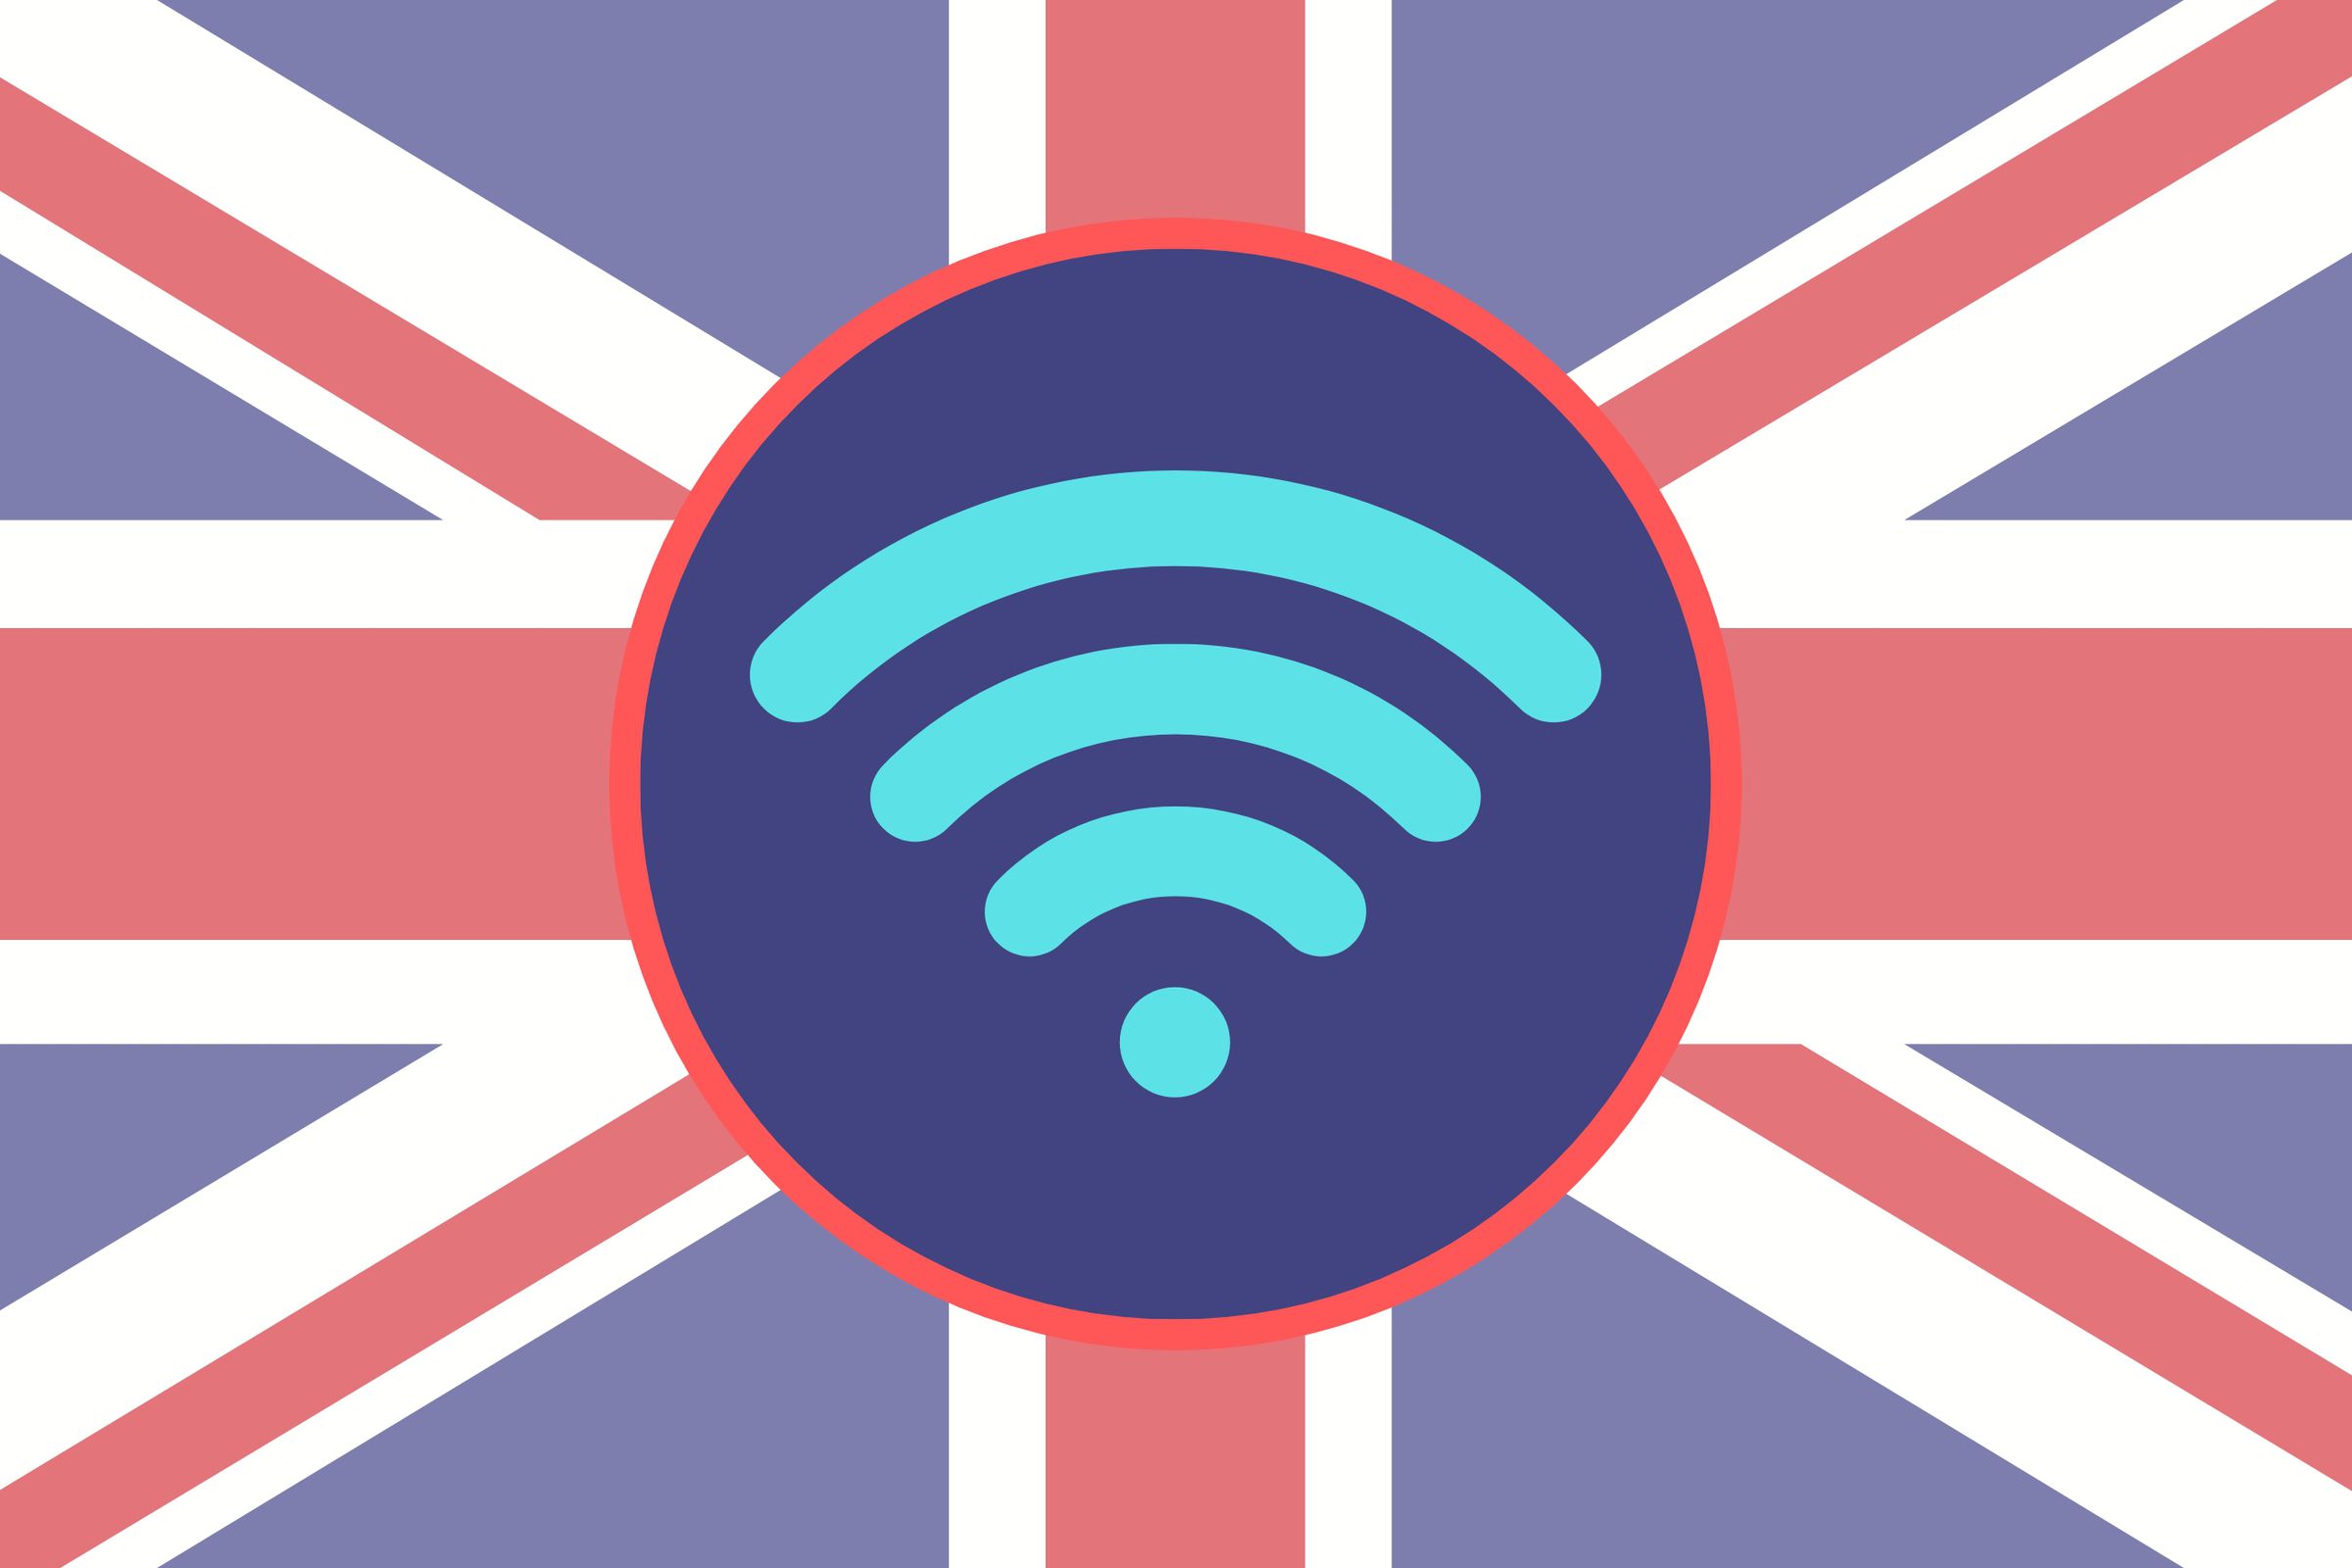 A Union Flag representing the UK with a wifi symbol in the center.